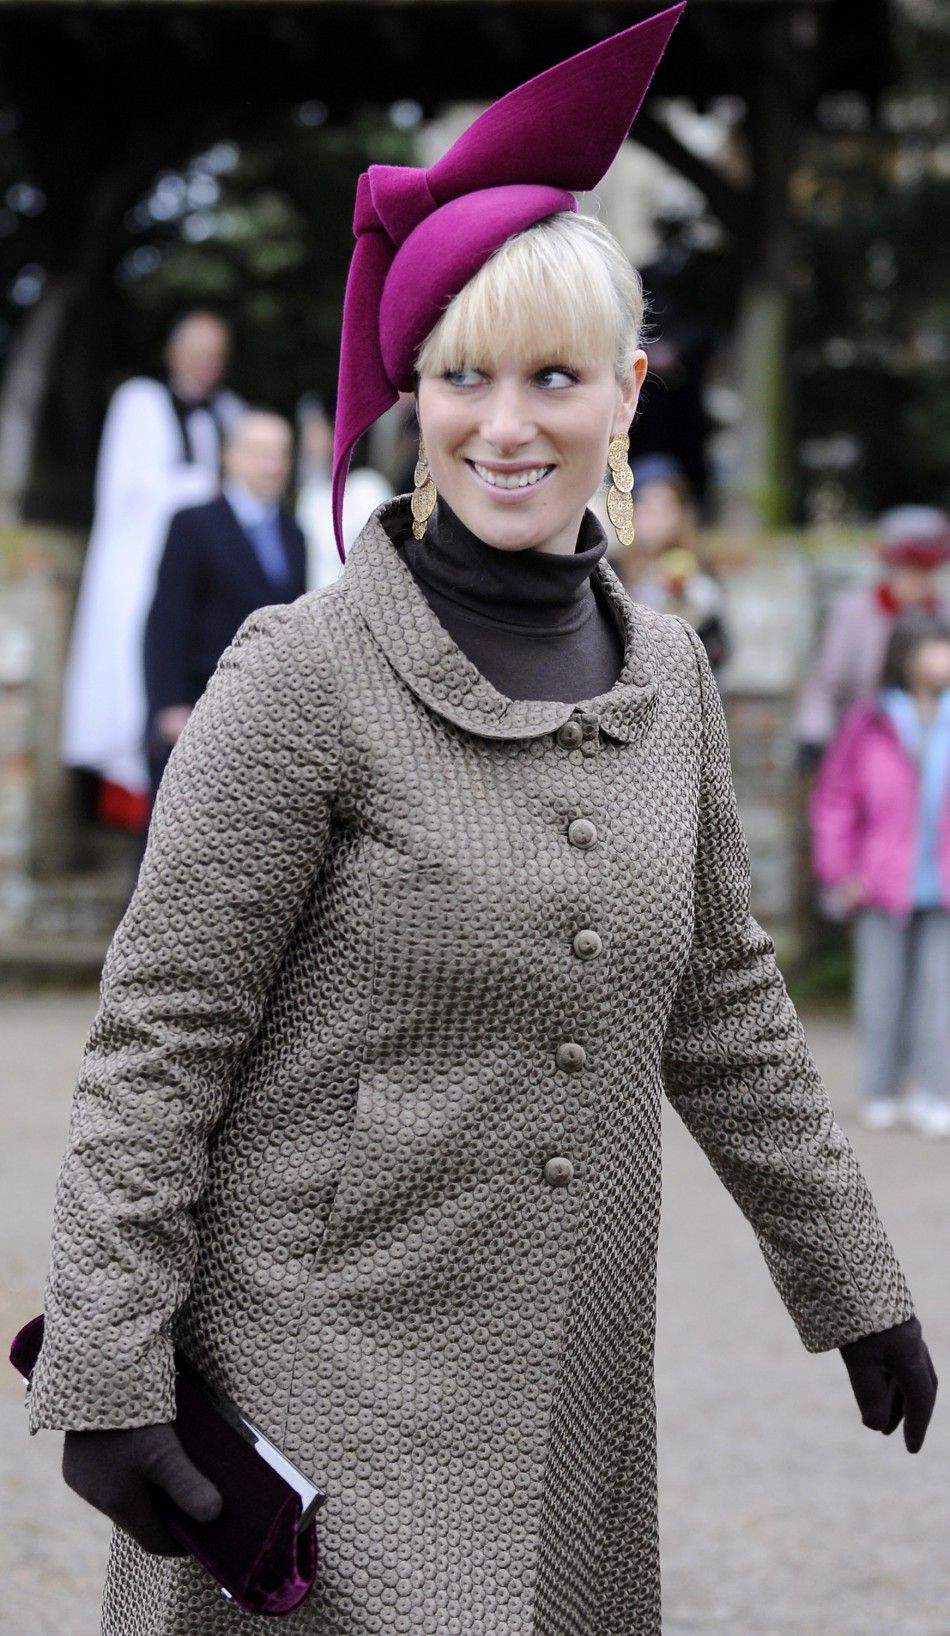 Britains Zara Phillips leaves Sandringham church following the annual Christmas Day church service at Sandringham Estate in Norfolk, east England